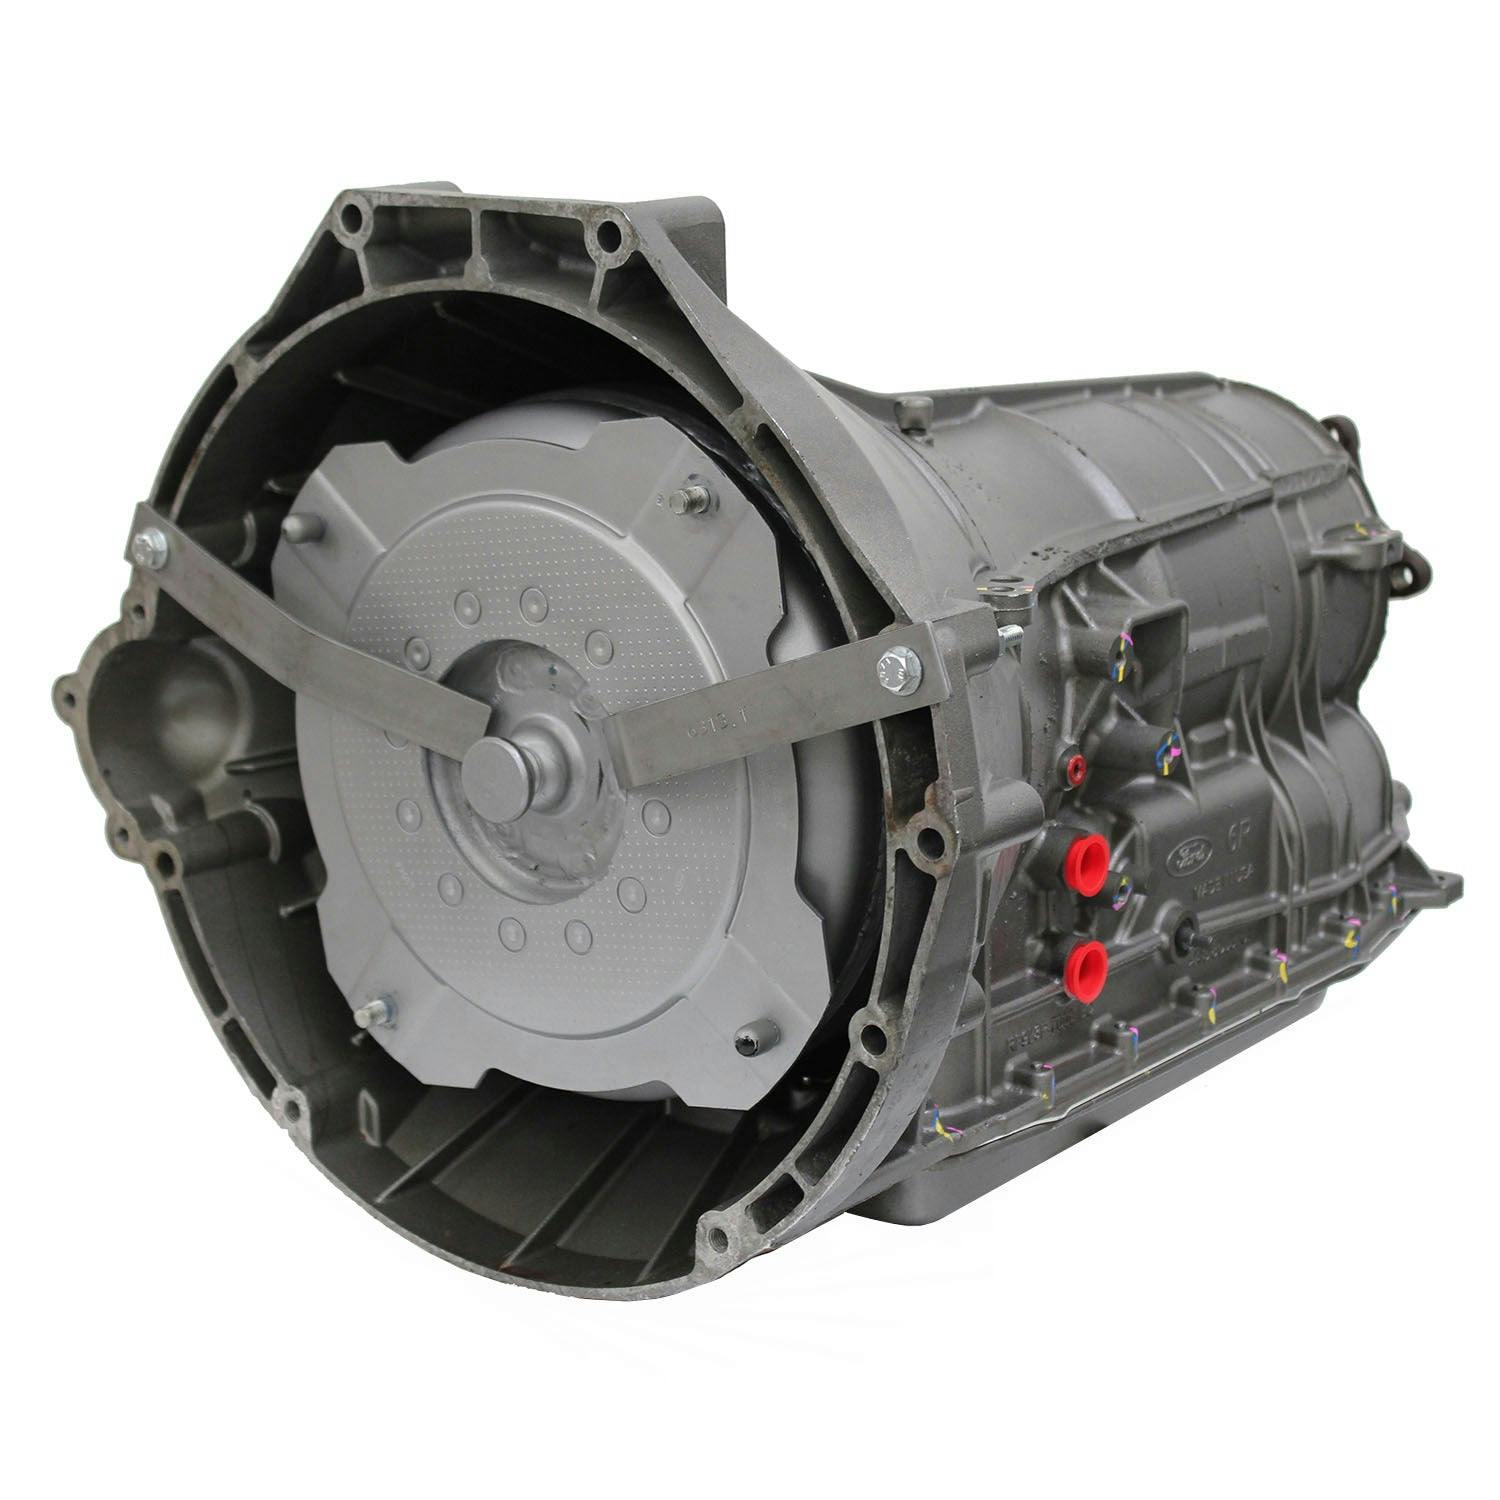 Automatic Transmission for 2006-2007 Ford Explorer/Explorer Sport Trac and Mercury Mountaineer RWD with 4.6L V8 Engine